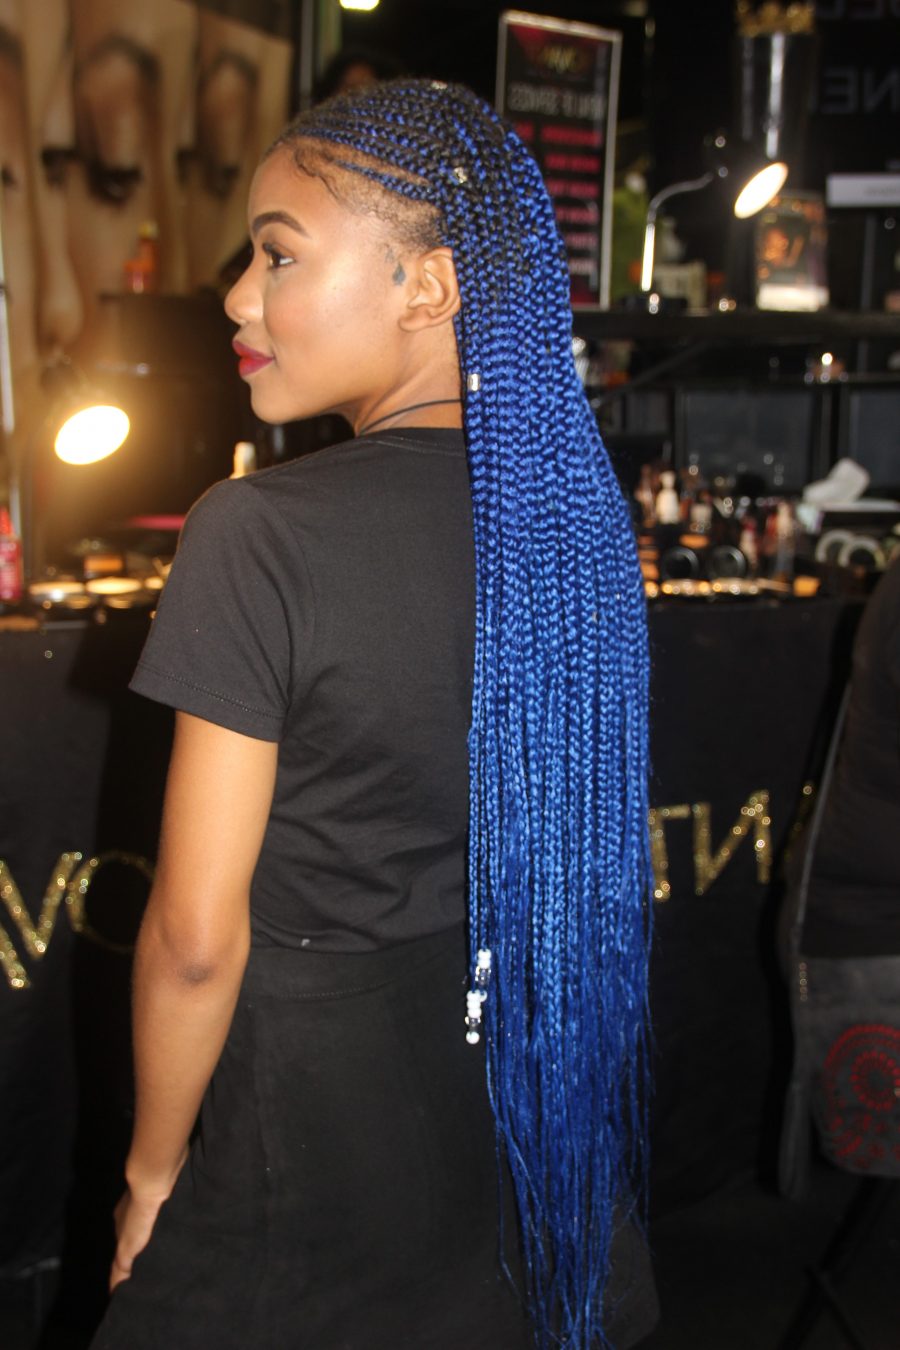 The Hottest Braided Hairstyles From The 2018 Bronner Bros Beauty Show